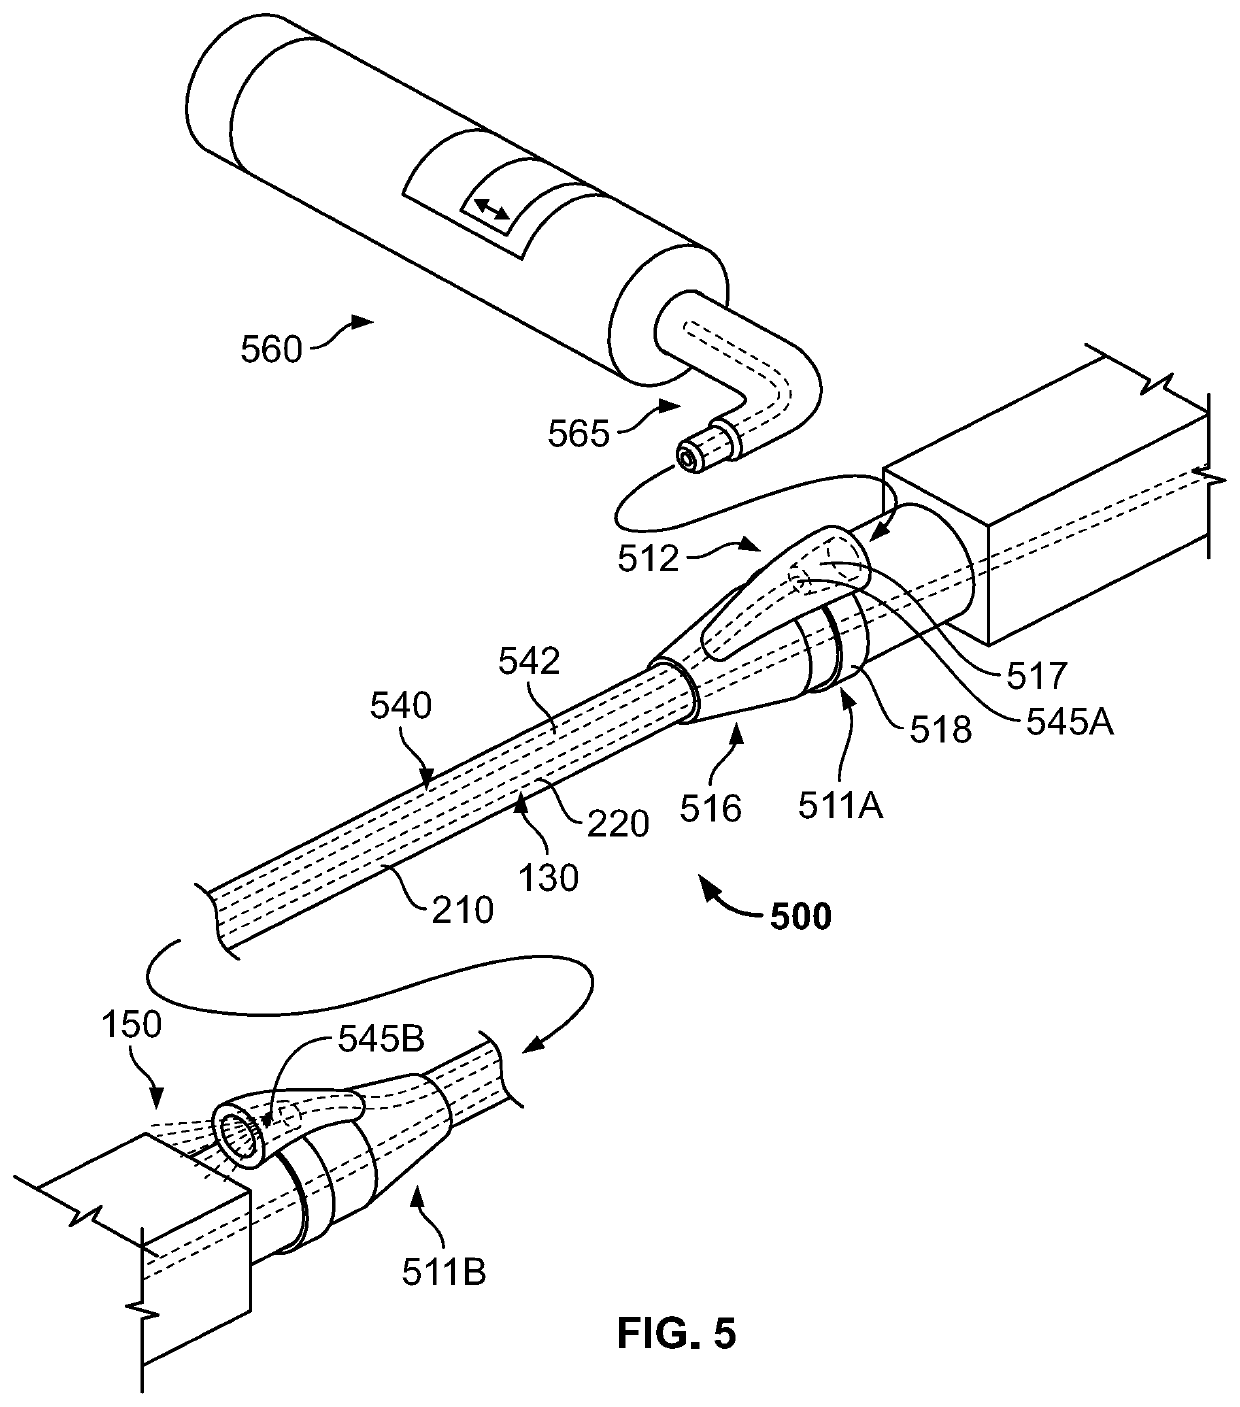 Optical cable with illumination path